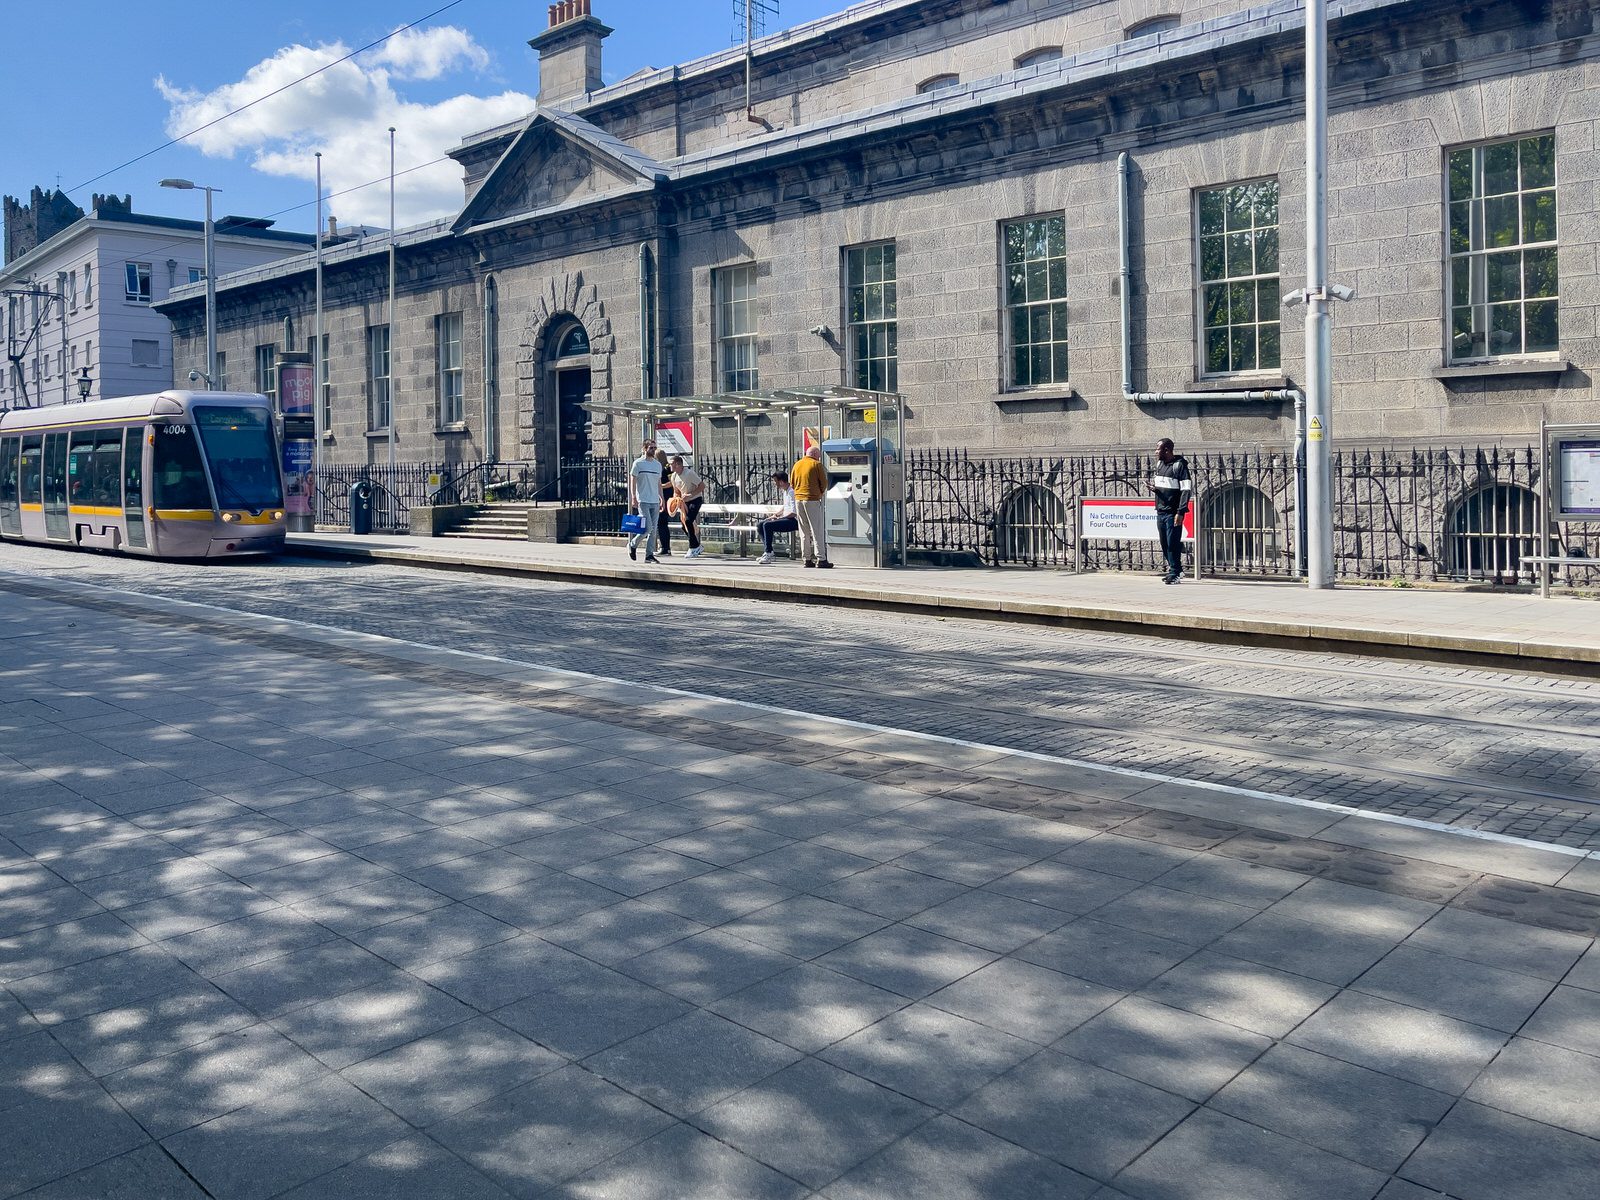 THE LUAS FOUR COURTS TRAM STOP [THERE IS MUCH TO BE SEEN HERE]-234100-1